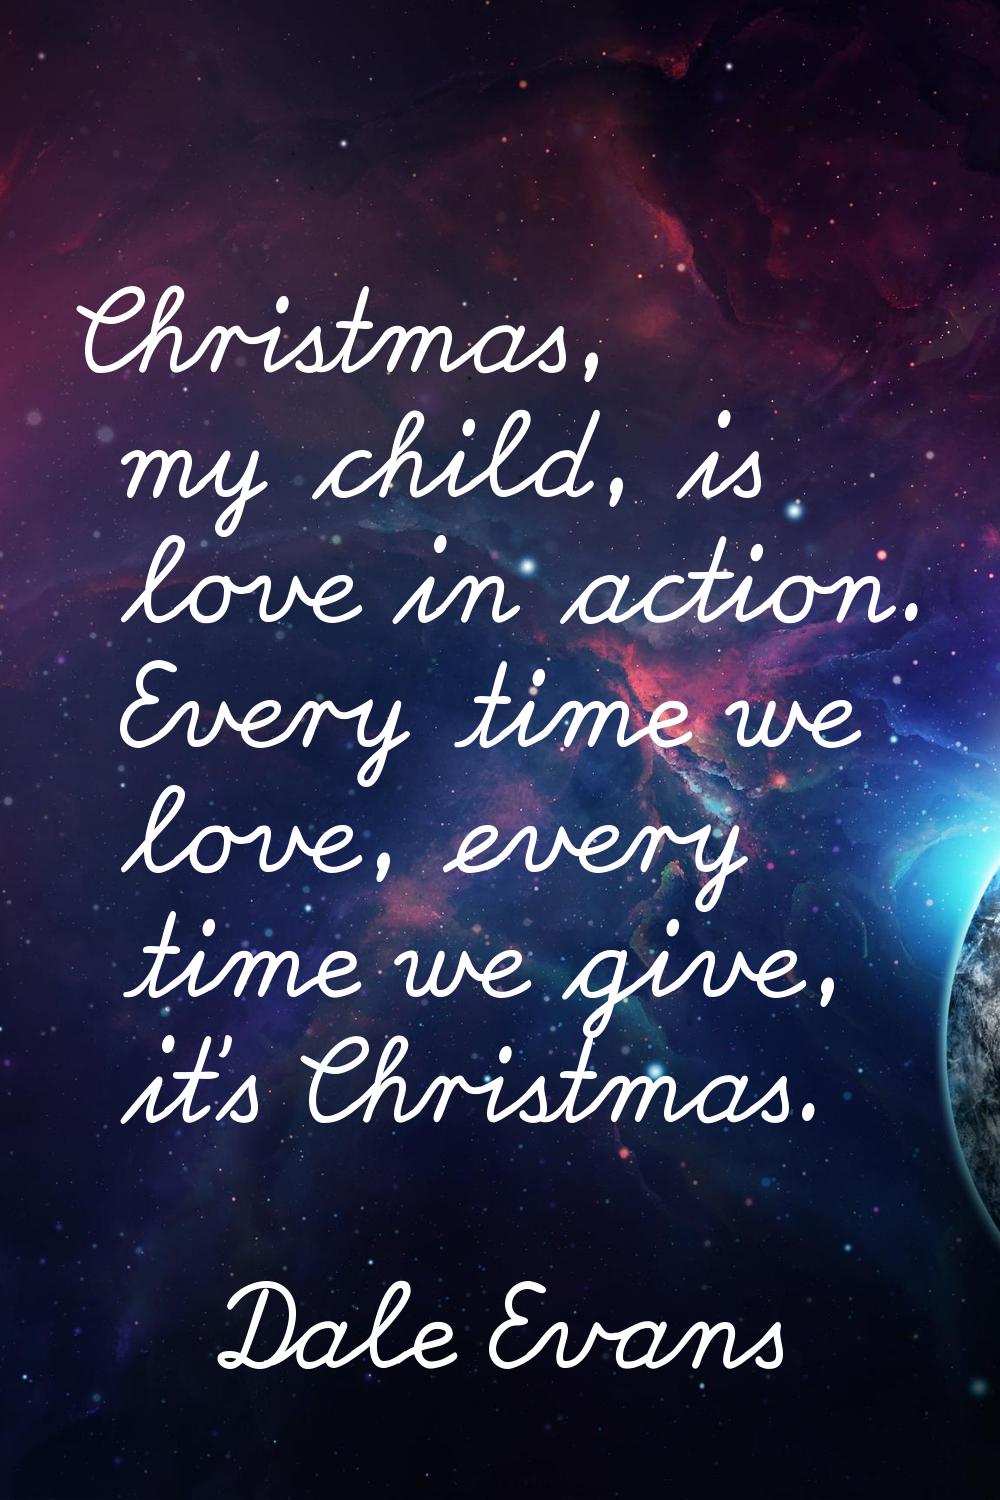 Christmas, my child, is love in action. Every time we love, every time we give, it's Christmas.